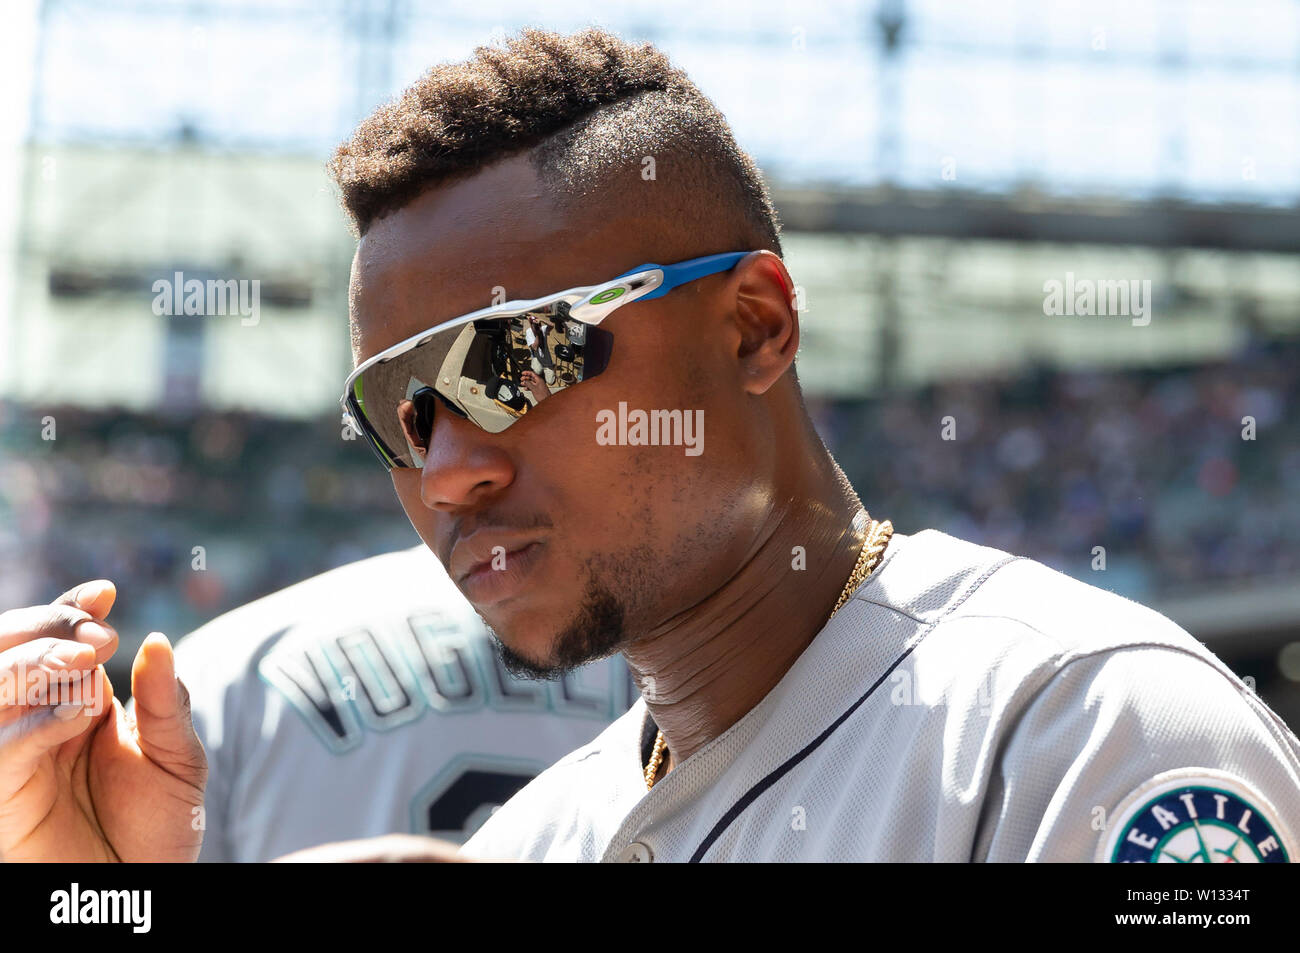 Oakley Sunglasses High Resolution Stock Photography and Images - Alamy